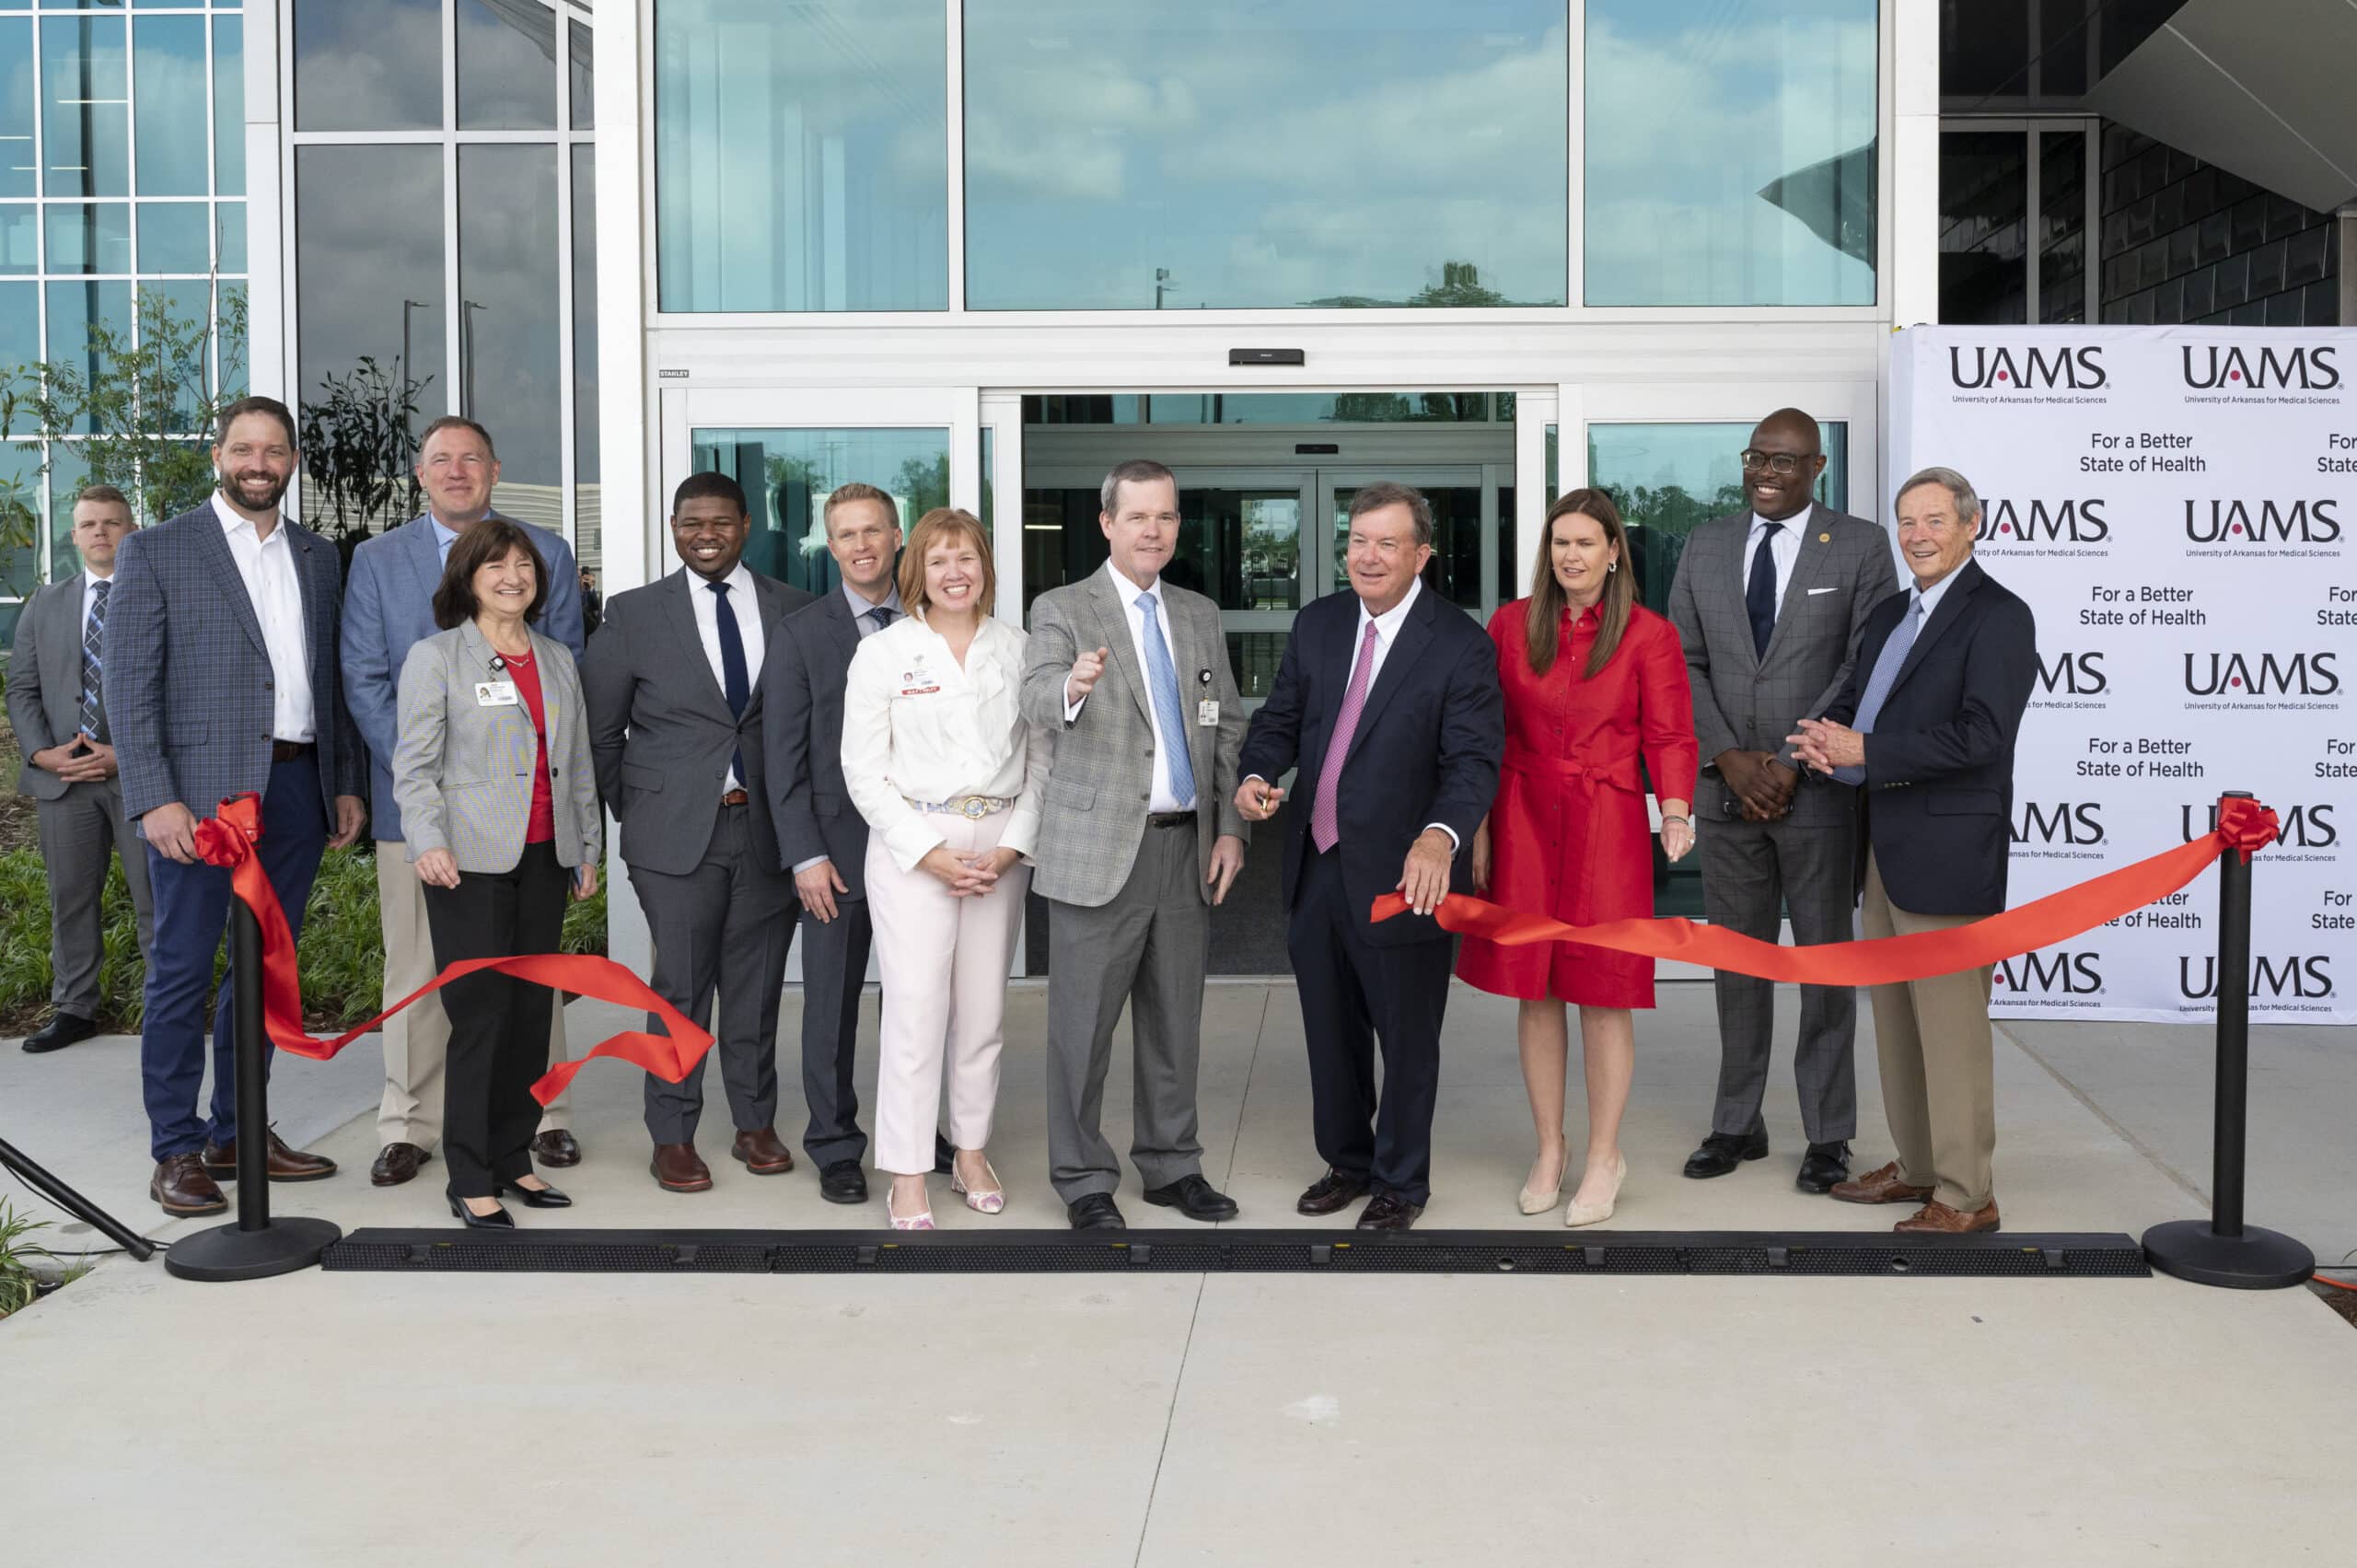 Smiles abound as C. Lowry Barnes, M.D., chair of the Department of Orthopaedic Surgery, flanked by Chancellor Cam Patterson, M.D., MBA and Gov. Sarah Huckabee Sanders, cuts the ribbon in front of The Orthopaedic & Spine Hospital. Also pictured (from L-R) Jake Nabholz, CEO of Nabholz Construction; Greg Cockman, CEO of Cromwell Architects Engineers; Stephanie Gardner, Pharm.D., Ed.D., UAMS senior vice chancellor for Academic Affairs, provost and chief strategy officer; Johnathan Goree, M.D., UAMS director of Interventional Pain Management Services; Paul Stover, UAMS assistant vice chancellor for Clinical Administration; Michelle Krause, M.D., senior vice chancellor for UAMS Health and CEO, UAMS Medical Center; Patterson; Barnes; Huckabee Sanders; Little Rock Mayor Frank Scott Jr.; and Morril Harriman, chair of the U of A System Board of Trustees.